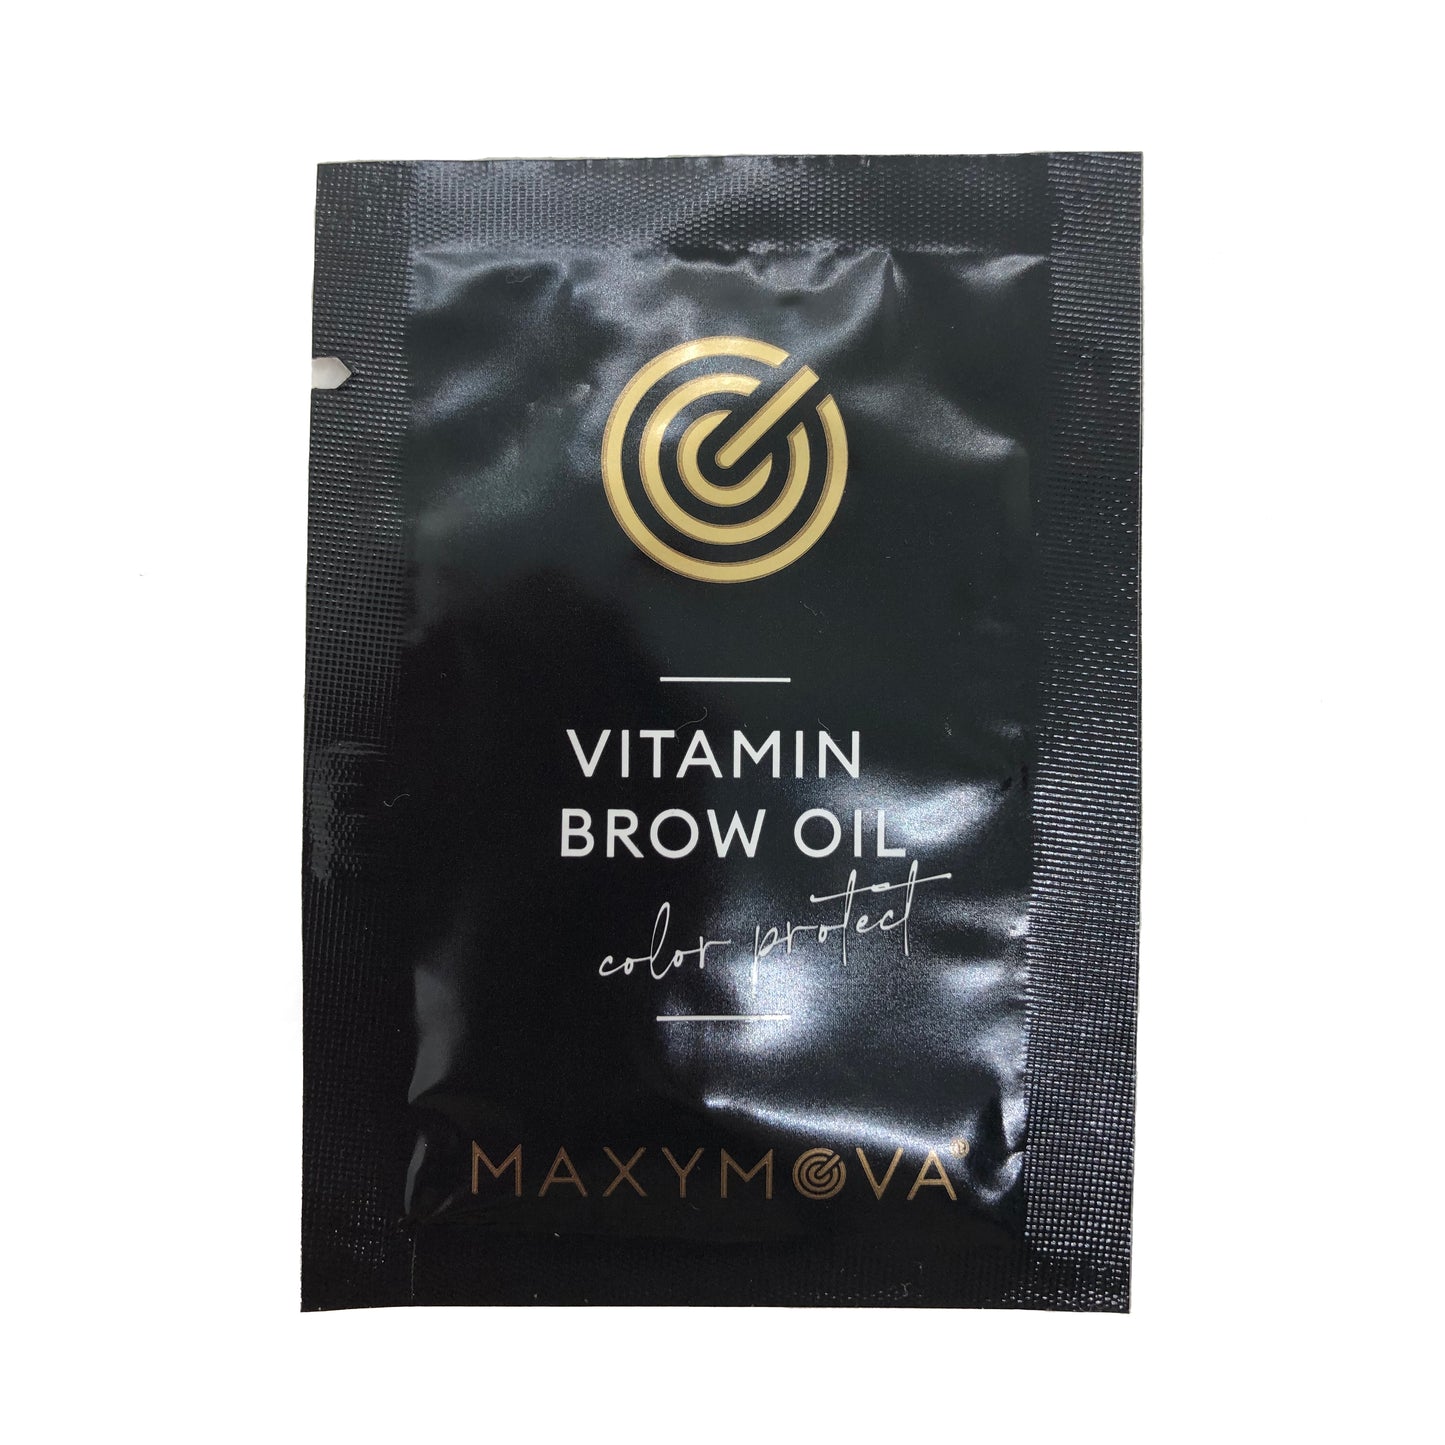 Vitamin Brow Oil, Nourishing Blend for Post-Henna or Tinting Treatments